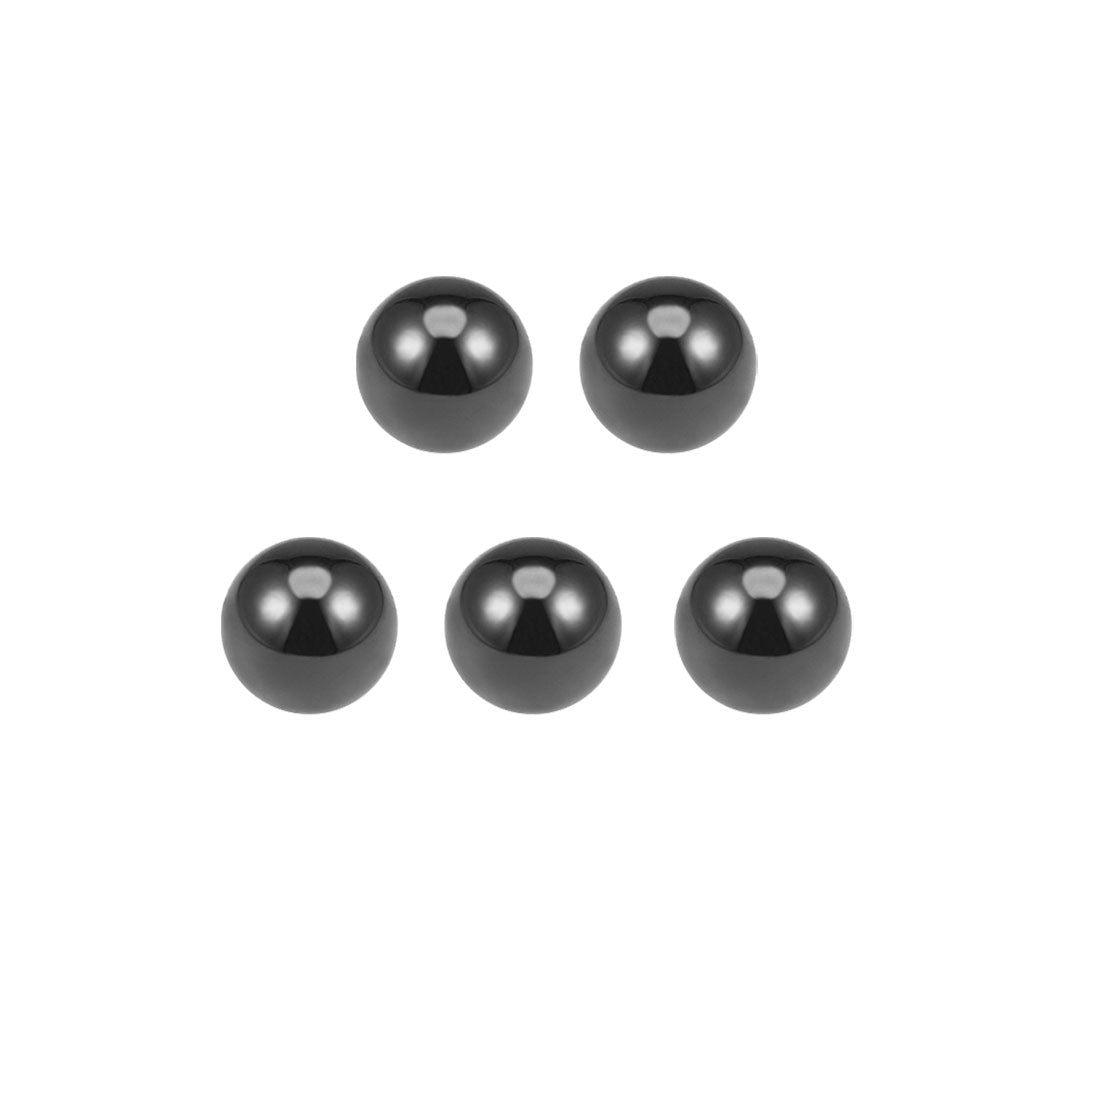 Uxcell Uxcell 5mm Ceramic Bearing Balls, Si3N4 Silicon Nitride Ball G5 Precision 12pcs